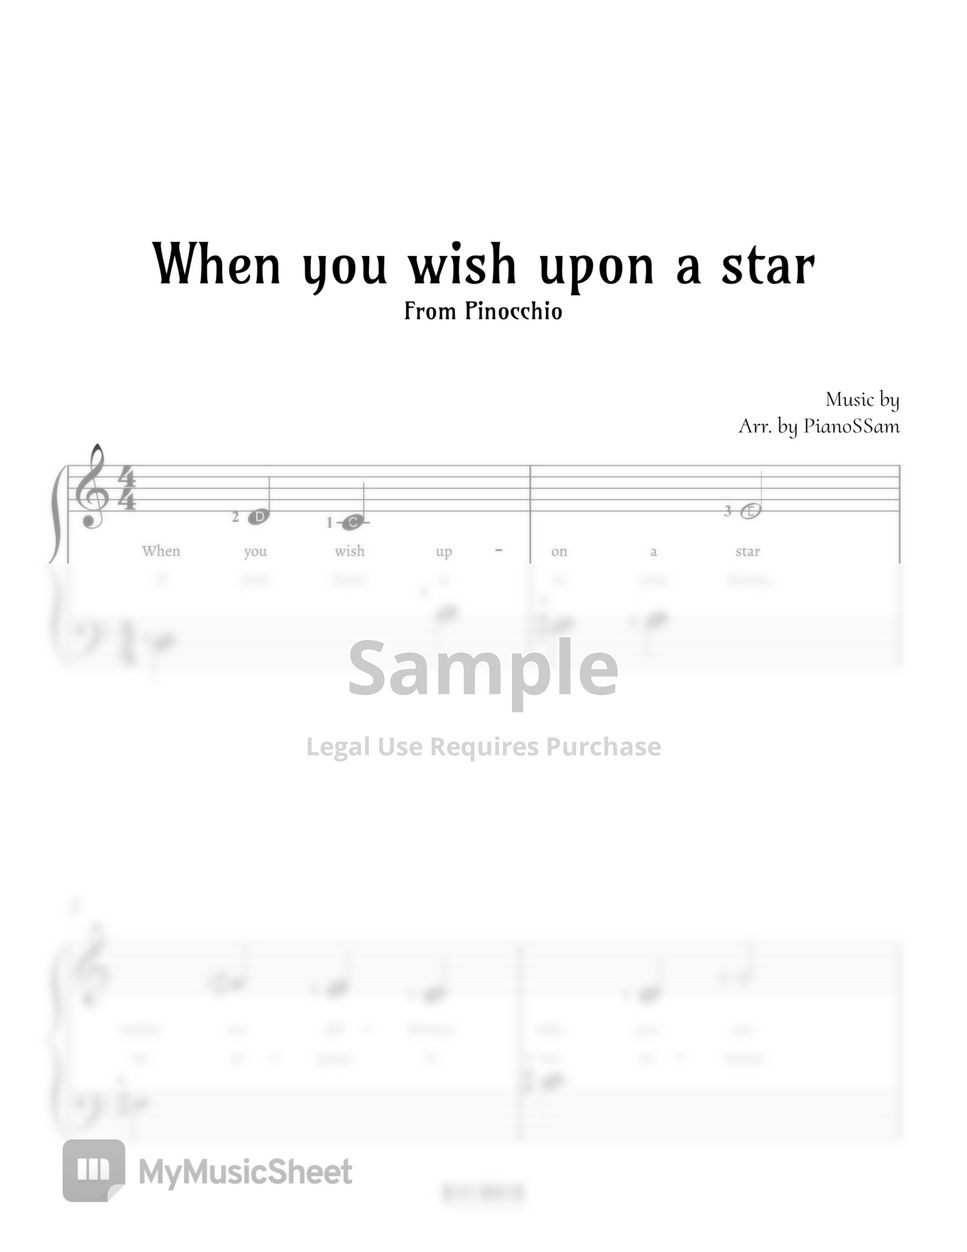 Leigh Harline - [Beginner] When you wish upon a star (Pinocchio) by PianoSSam